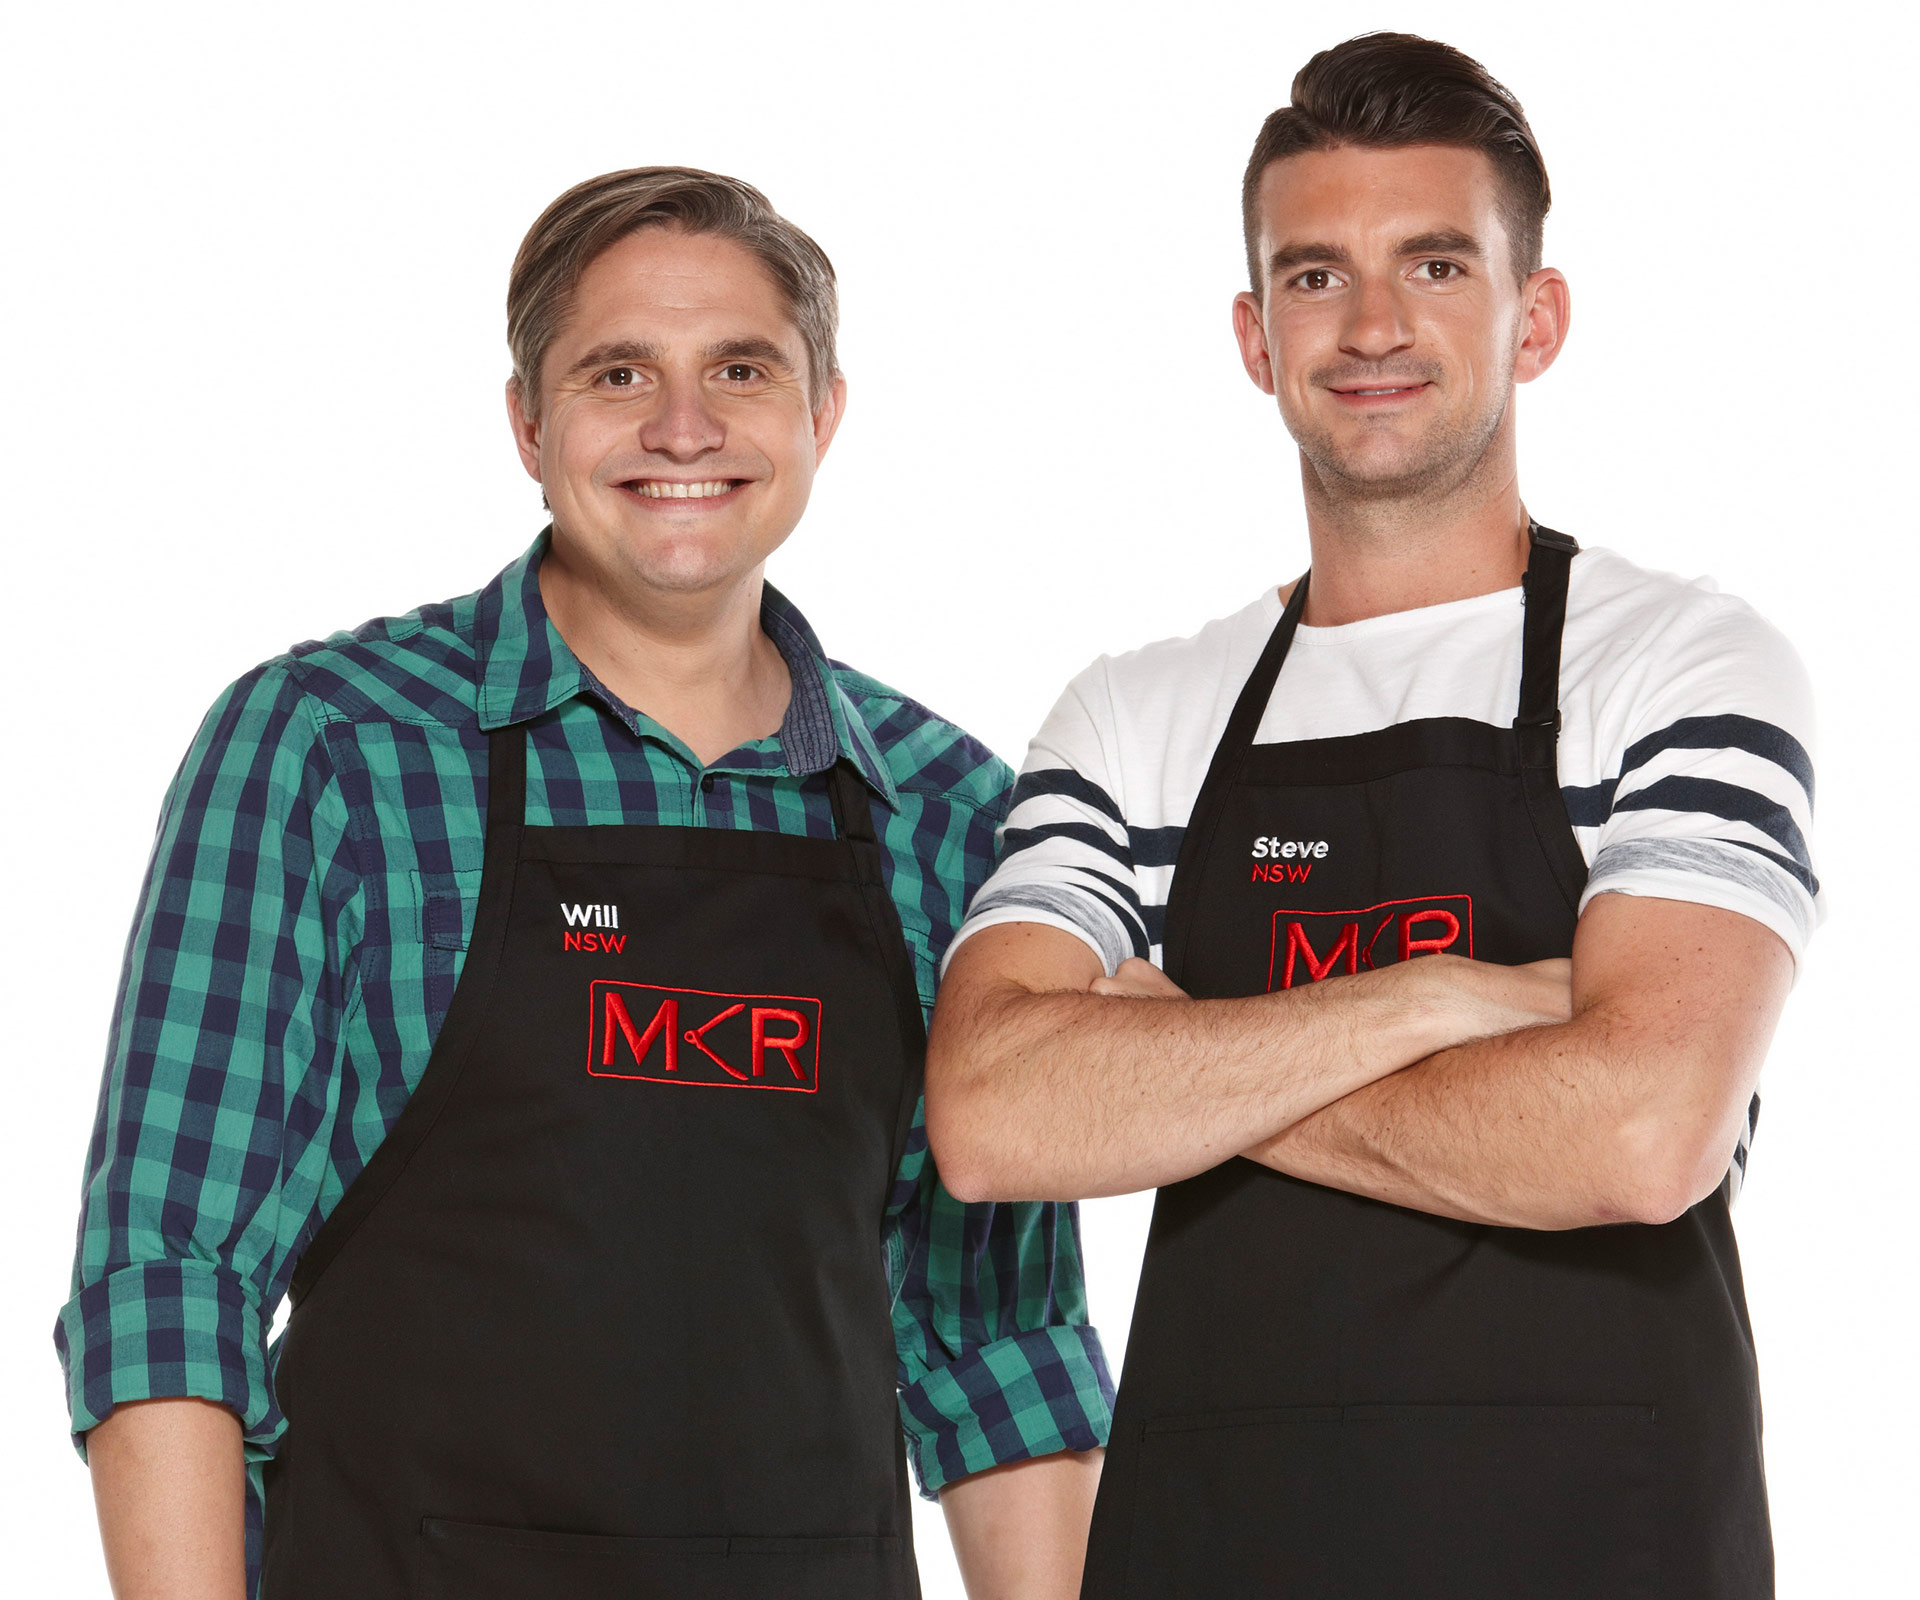 My Kitchen Rules 2015 winners revealed!